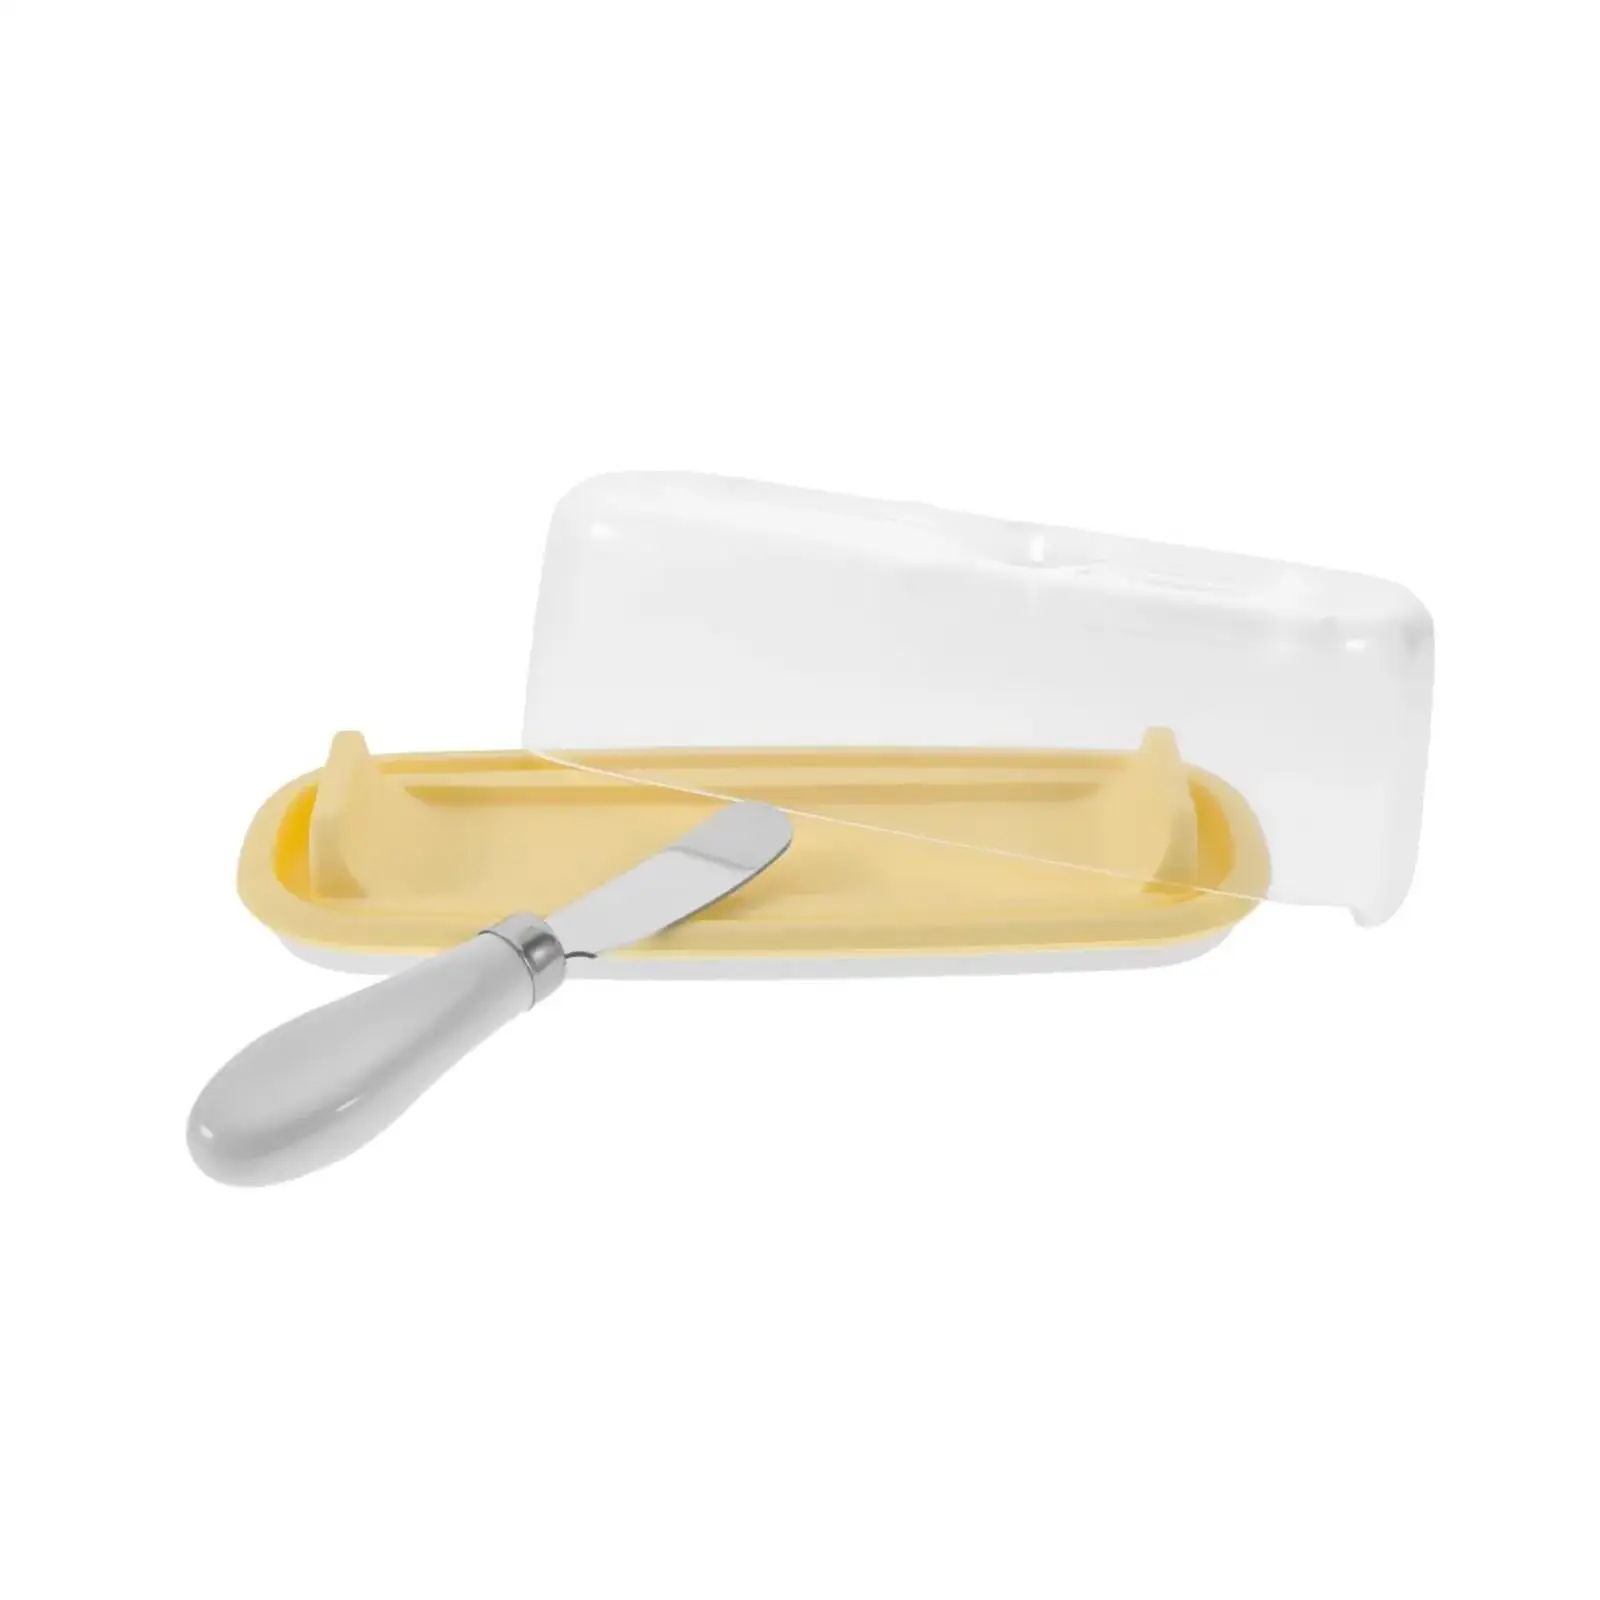 Butter Dish with Cover and Knife Set Easy Grip Handles Easy Clean Fresh Keeping Ramps Butter Holder Plate for Dining